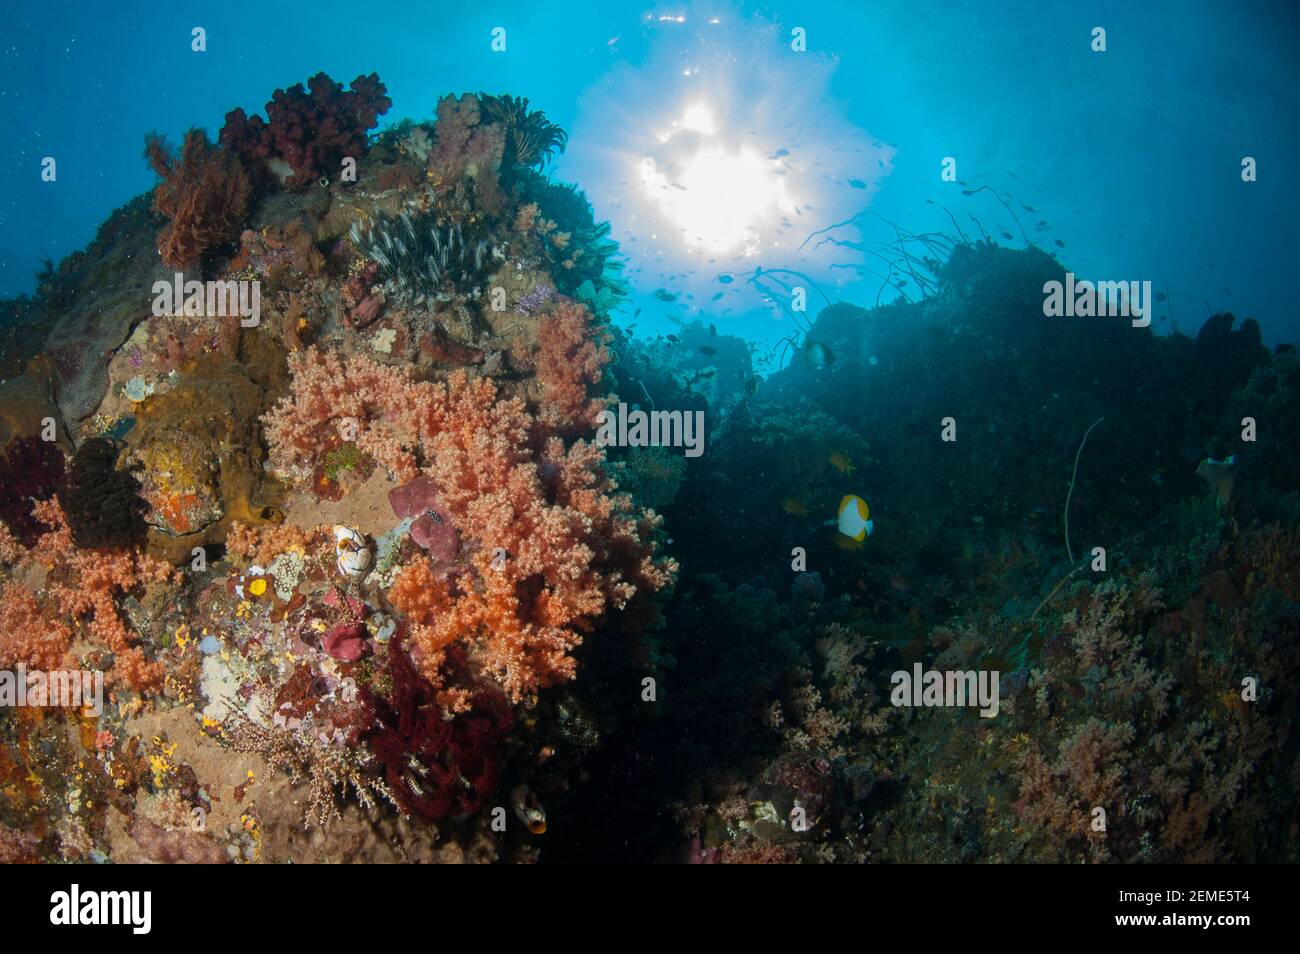 Coral, Anthozoa Class, wall with sun in background, Dante's Wall dive site, Lembeh Straits, Sulawesi, Indonesia Stock Photo